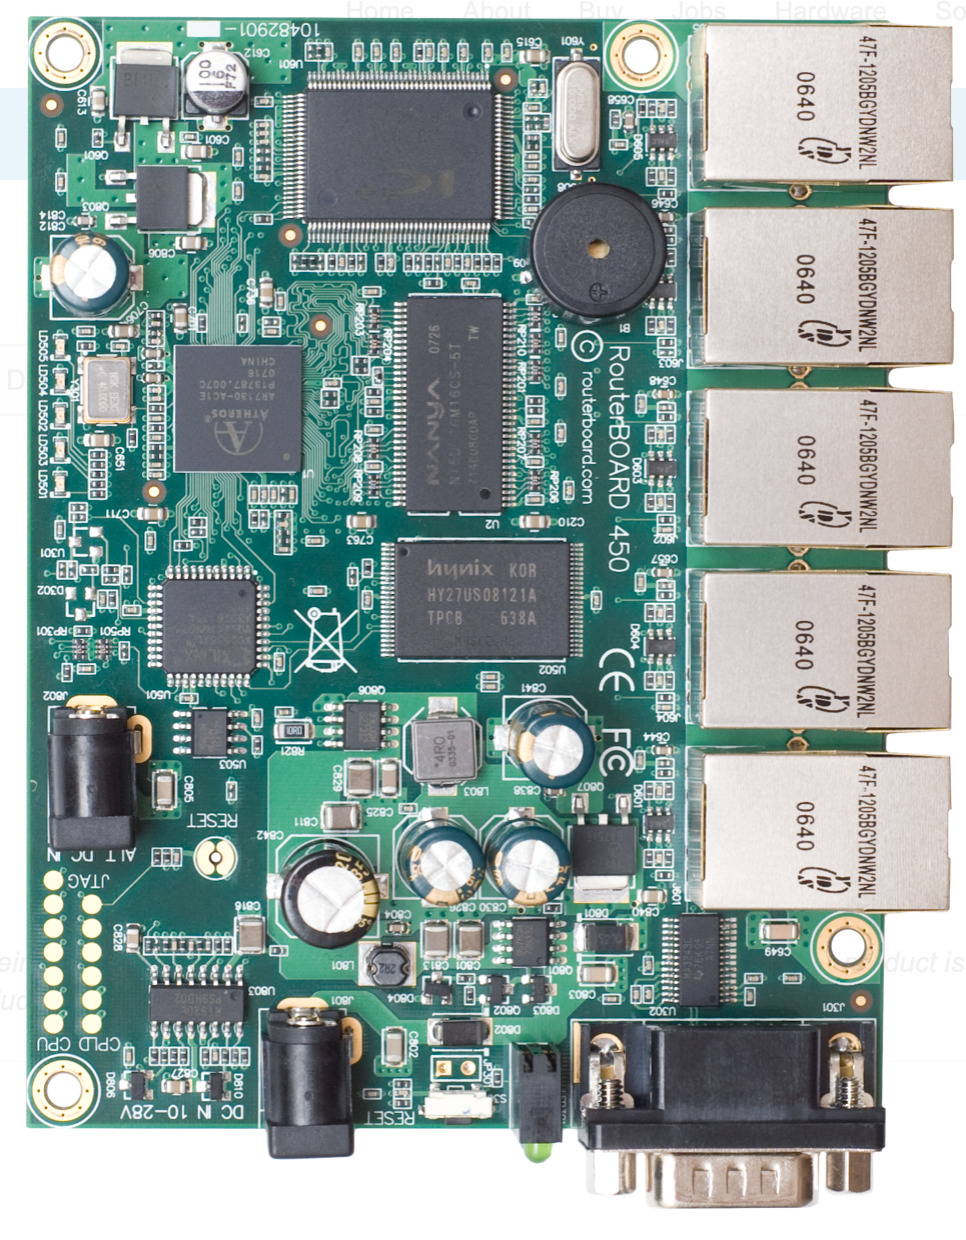 One (1) NEW MikroTik RB450 Routerboard, 300MHz CPU, 64MB RAM, 5xEthernet